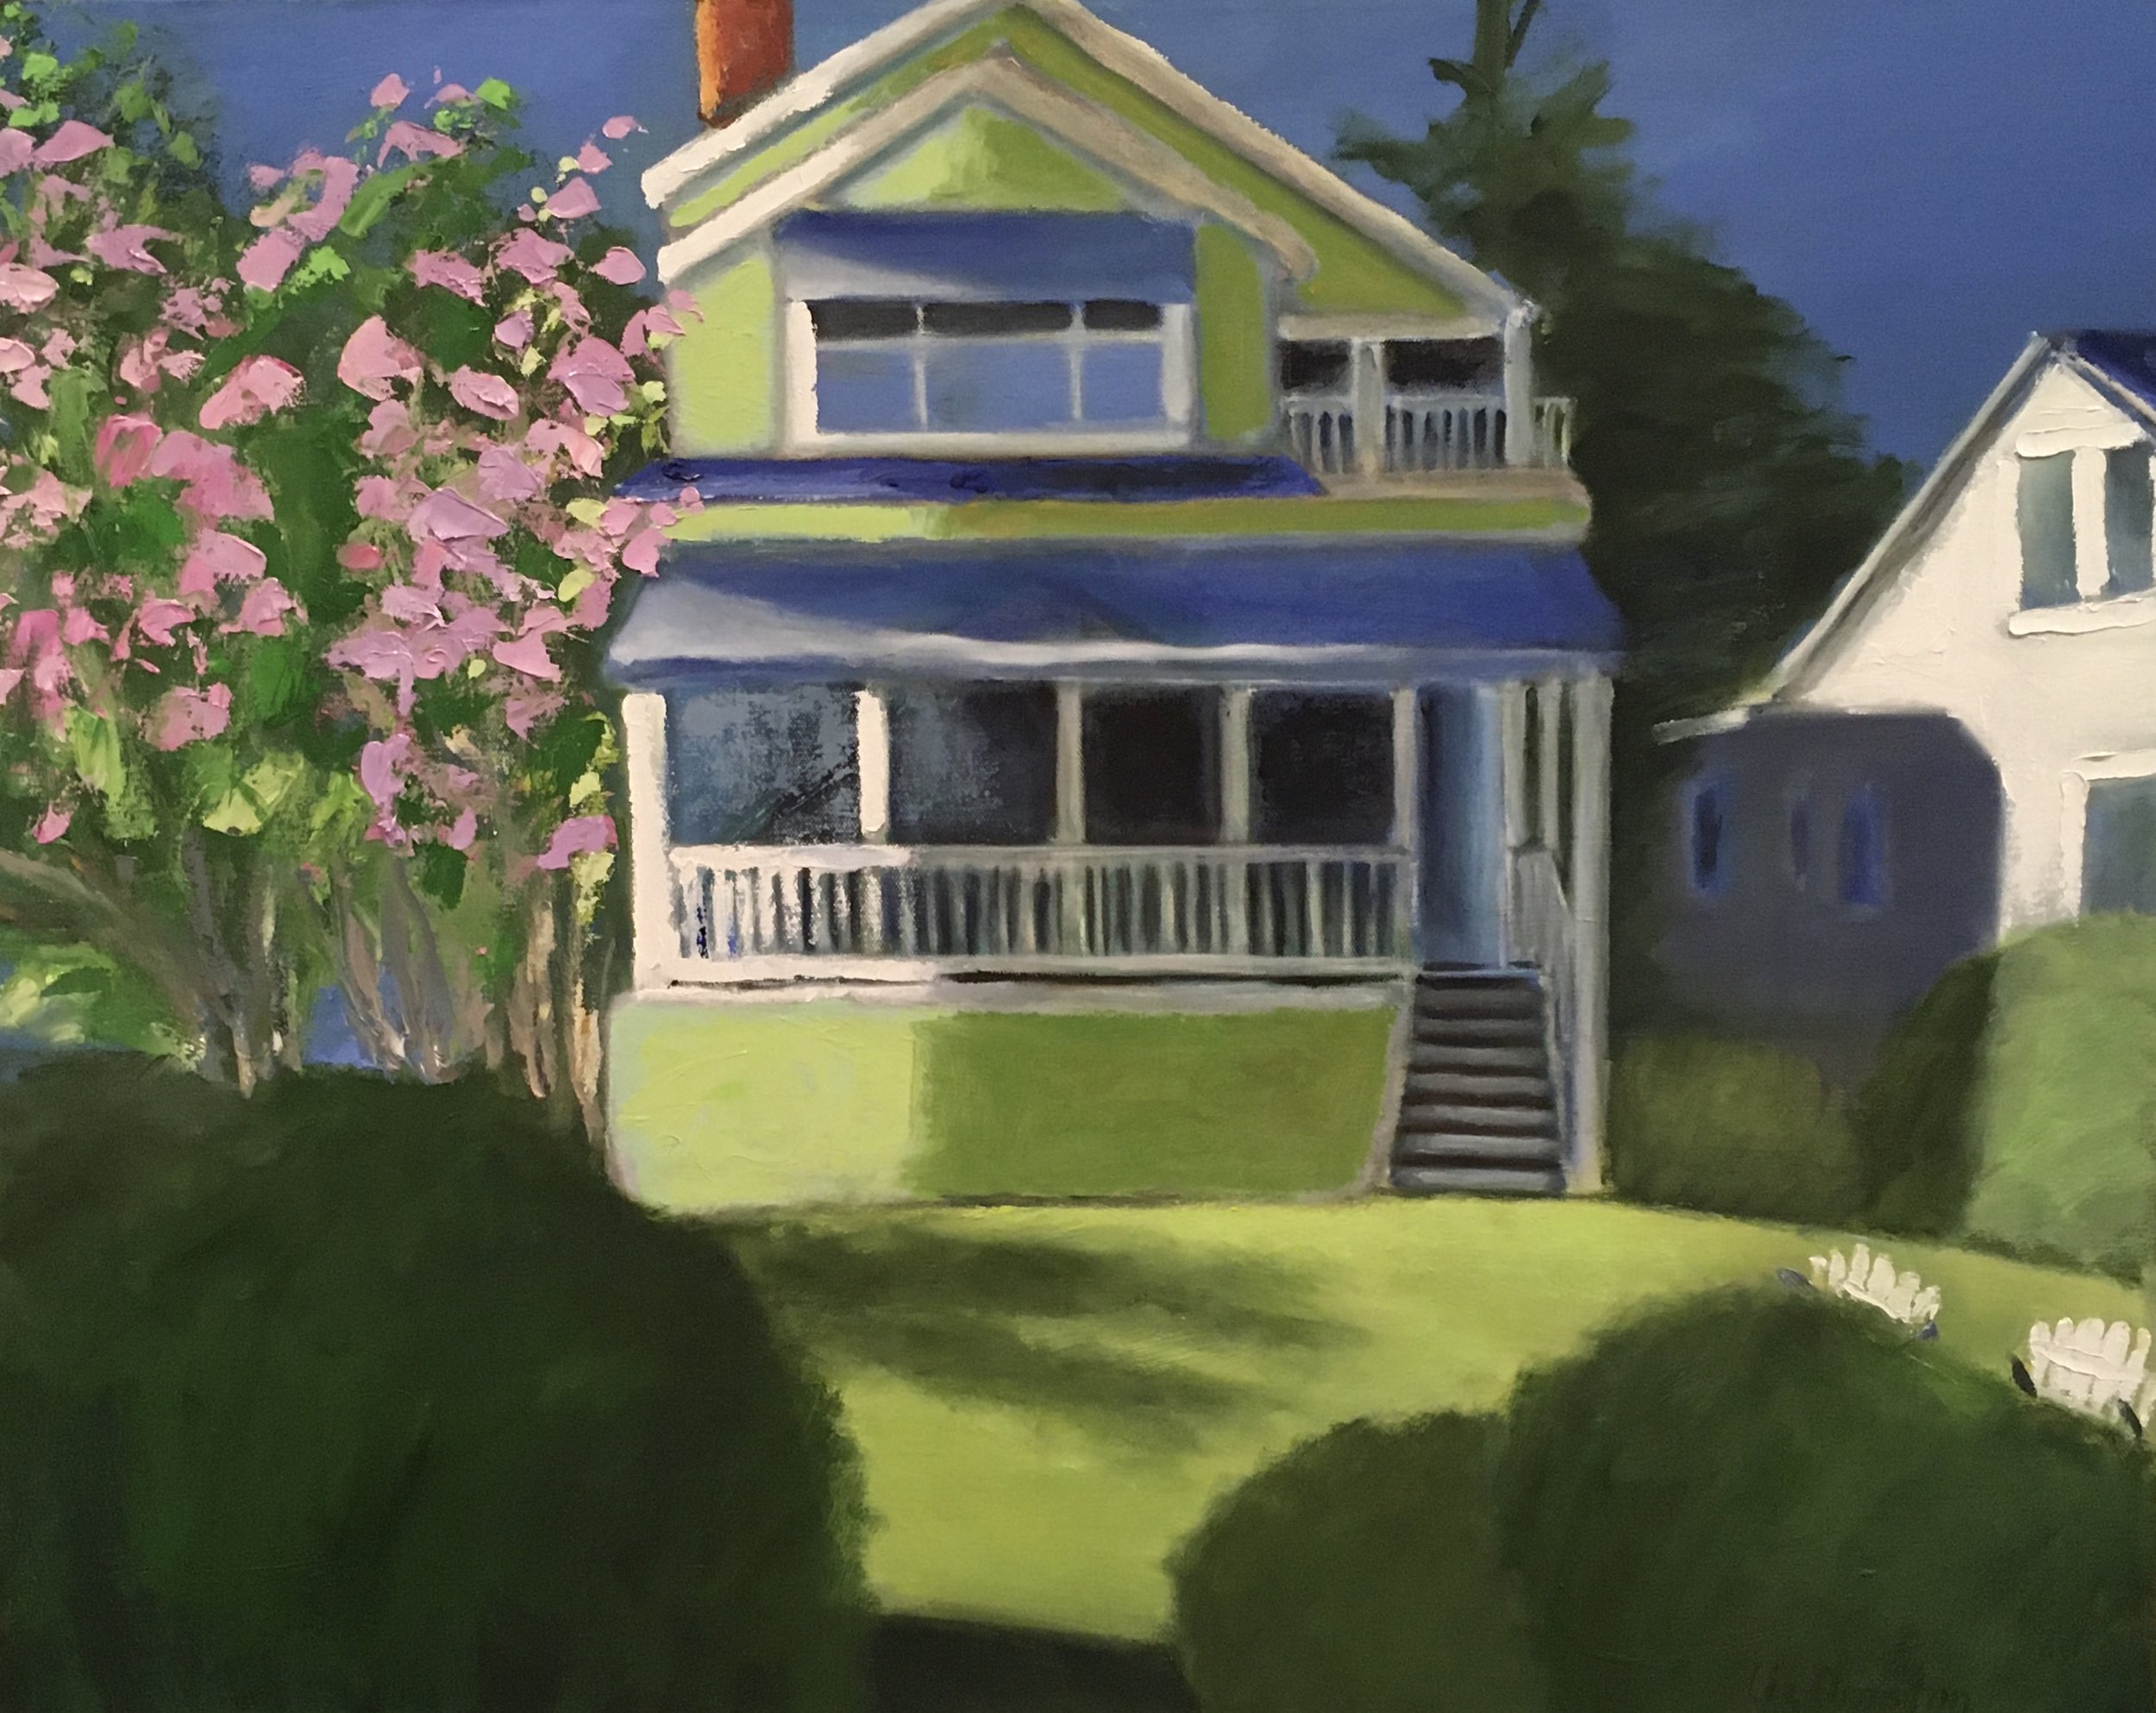 "Bethany House Crepe Myrtle" | Oil on Canvas | 24x30 